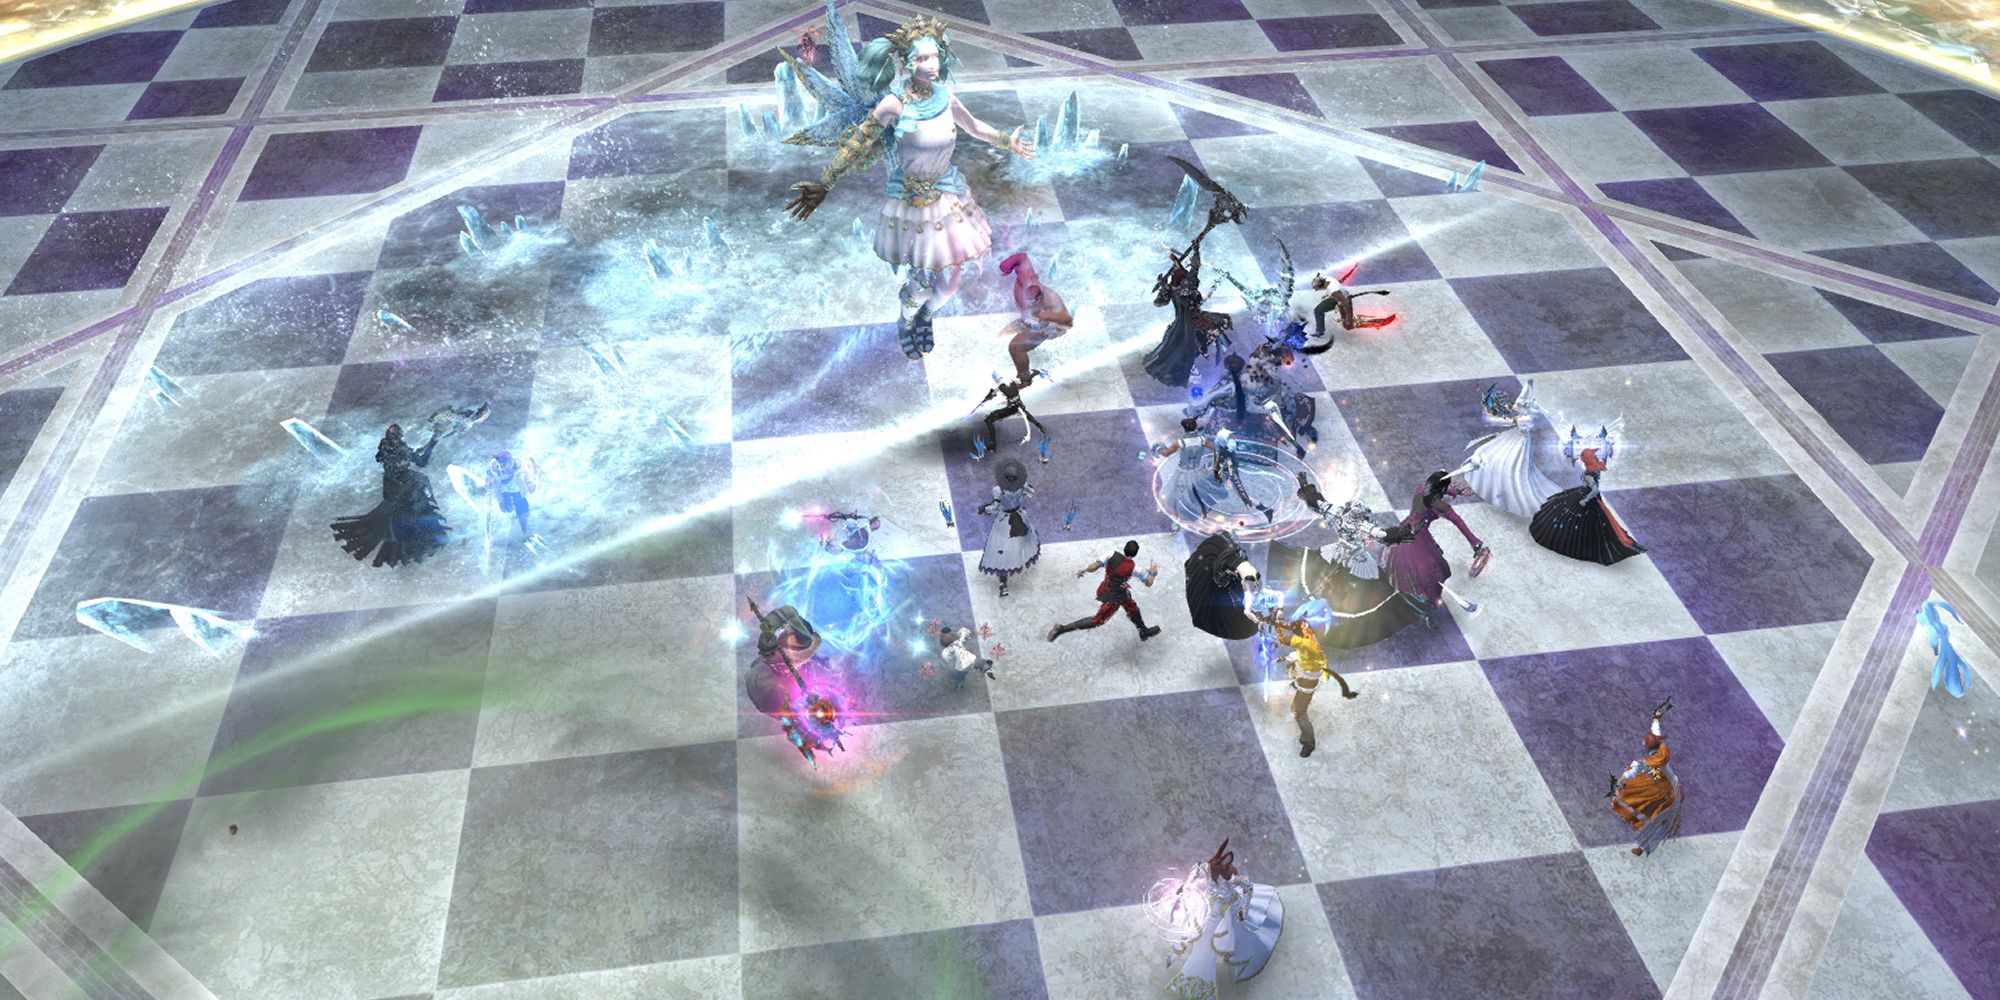 An image of Menphina from Final Fantasy 14's Euphrosyne raid, using the ability Midnight Frost, summoning deadly ice at her heels.